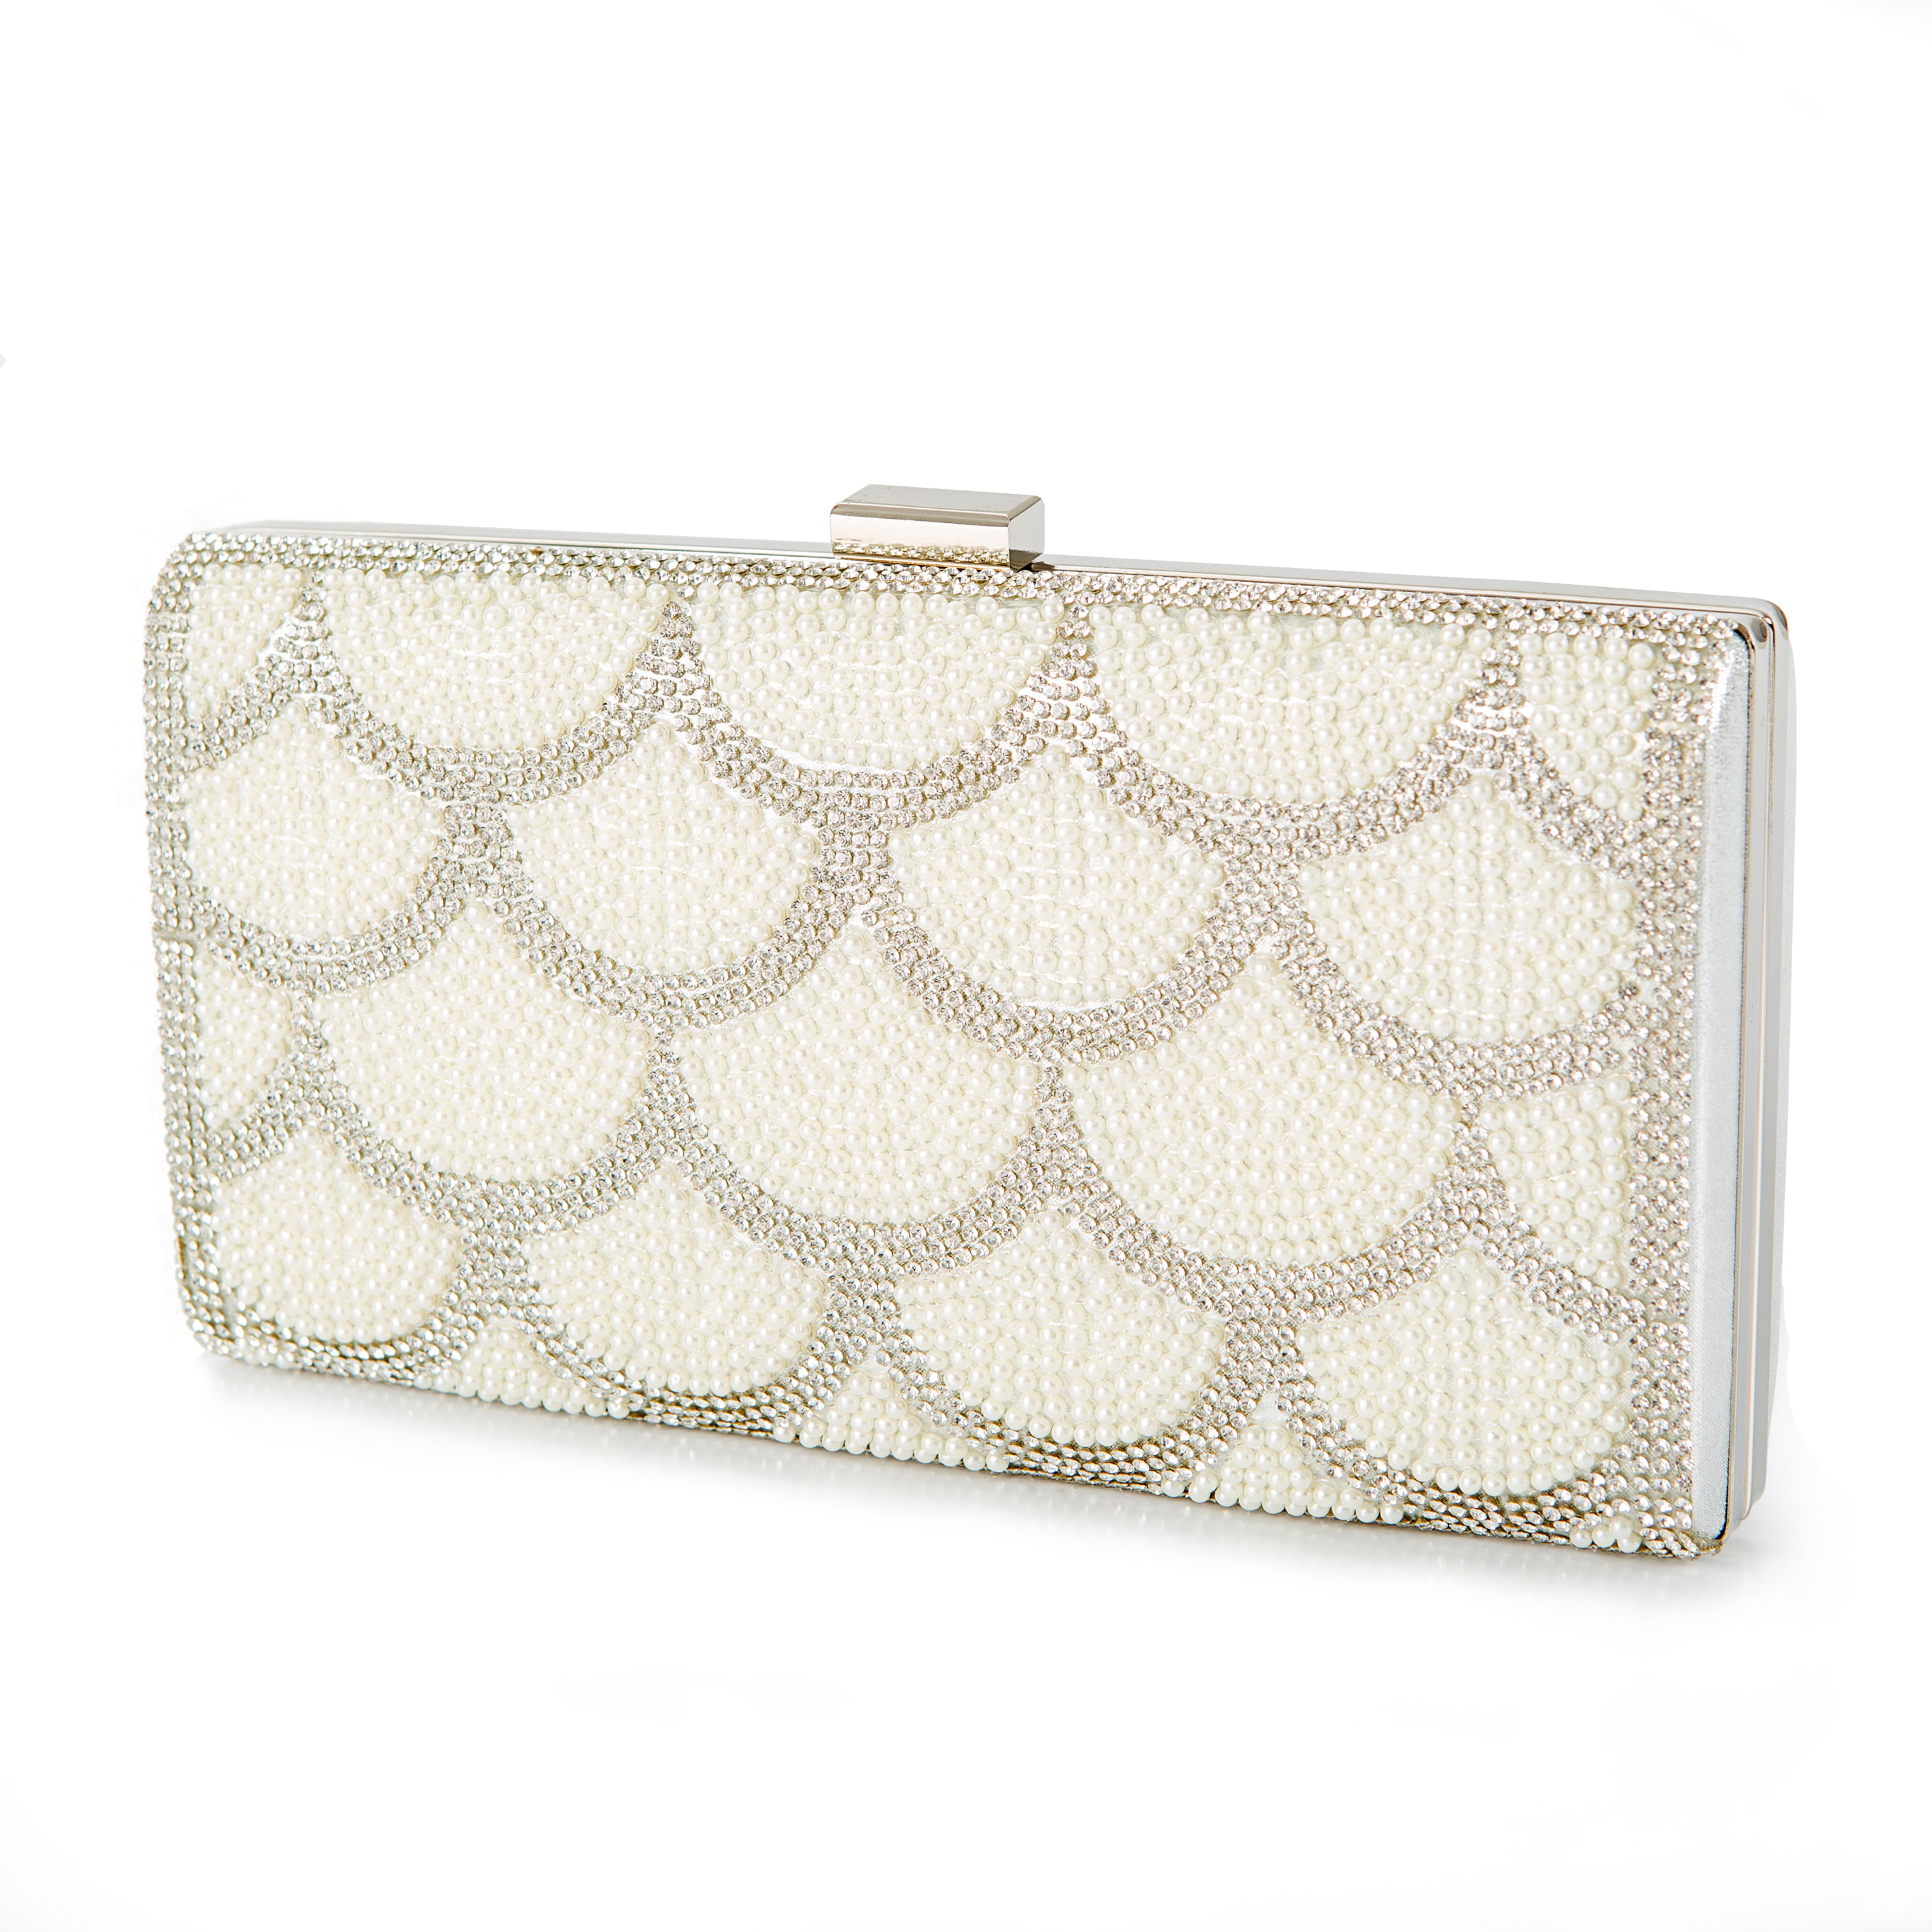 Clutch Purses for Women Evening Bags And Clutches for Women Wedding Cocktail Party Bag 